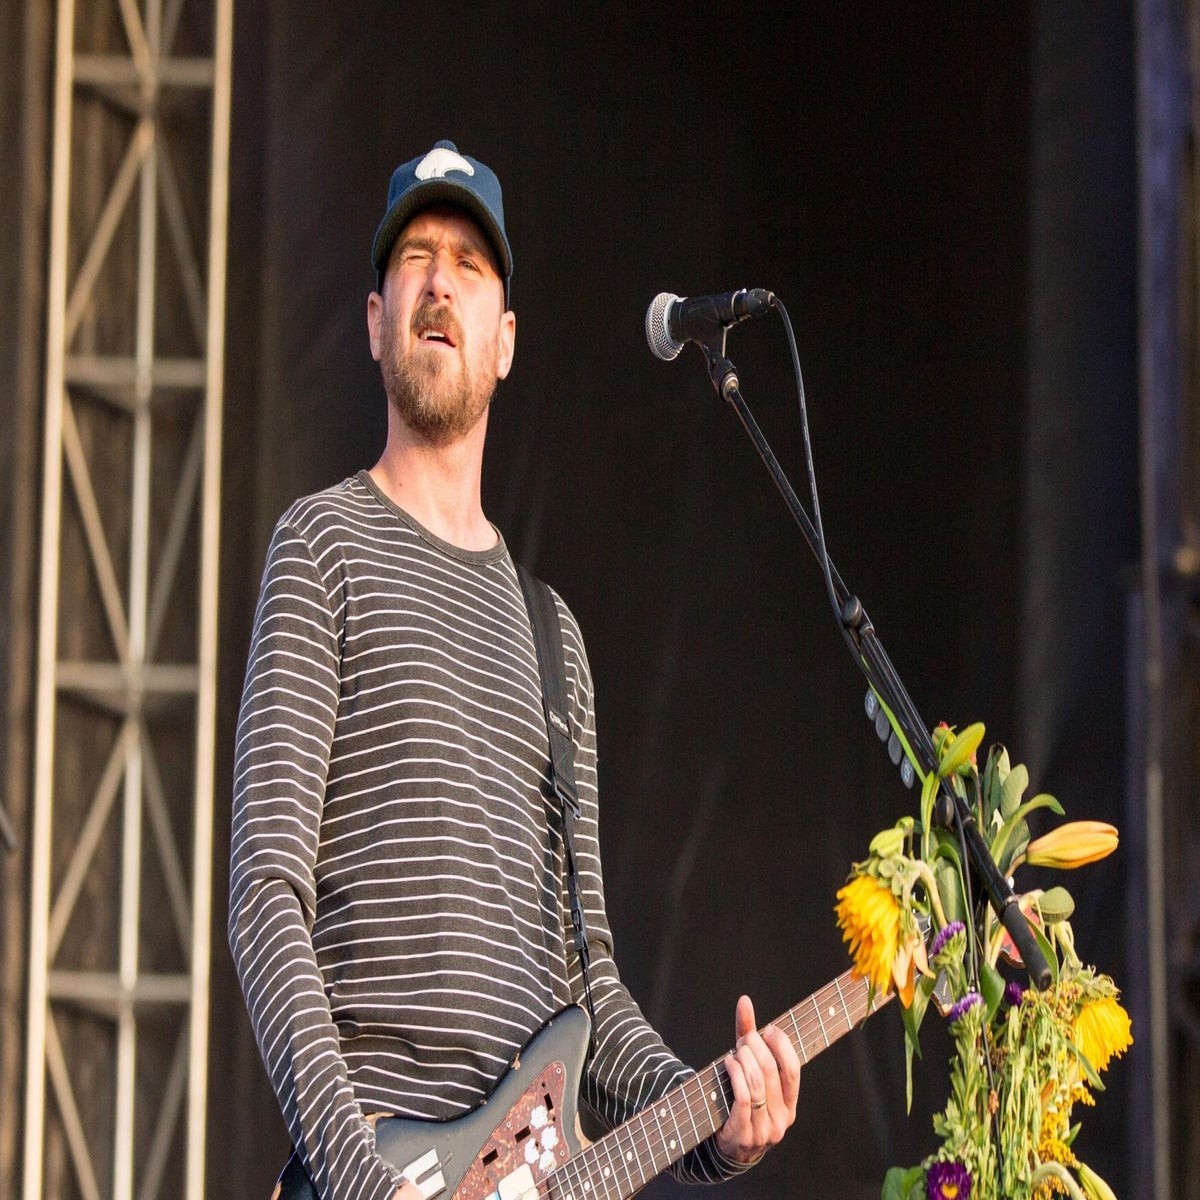 Brand New's Jesse Lacey Releases Statement Regarding Allegations